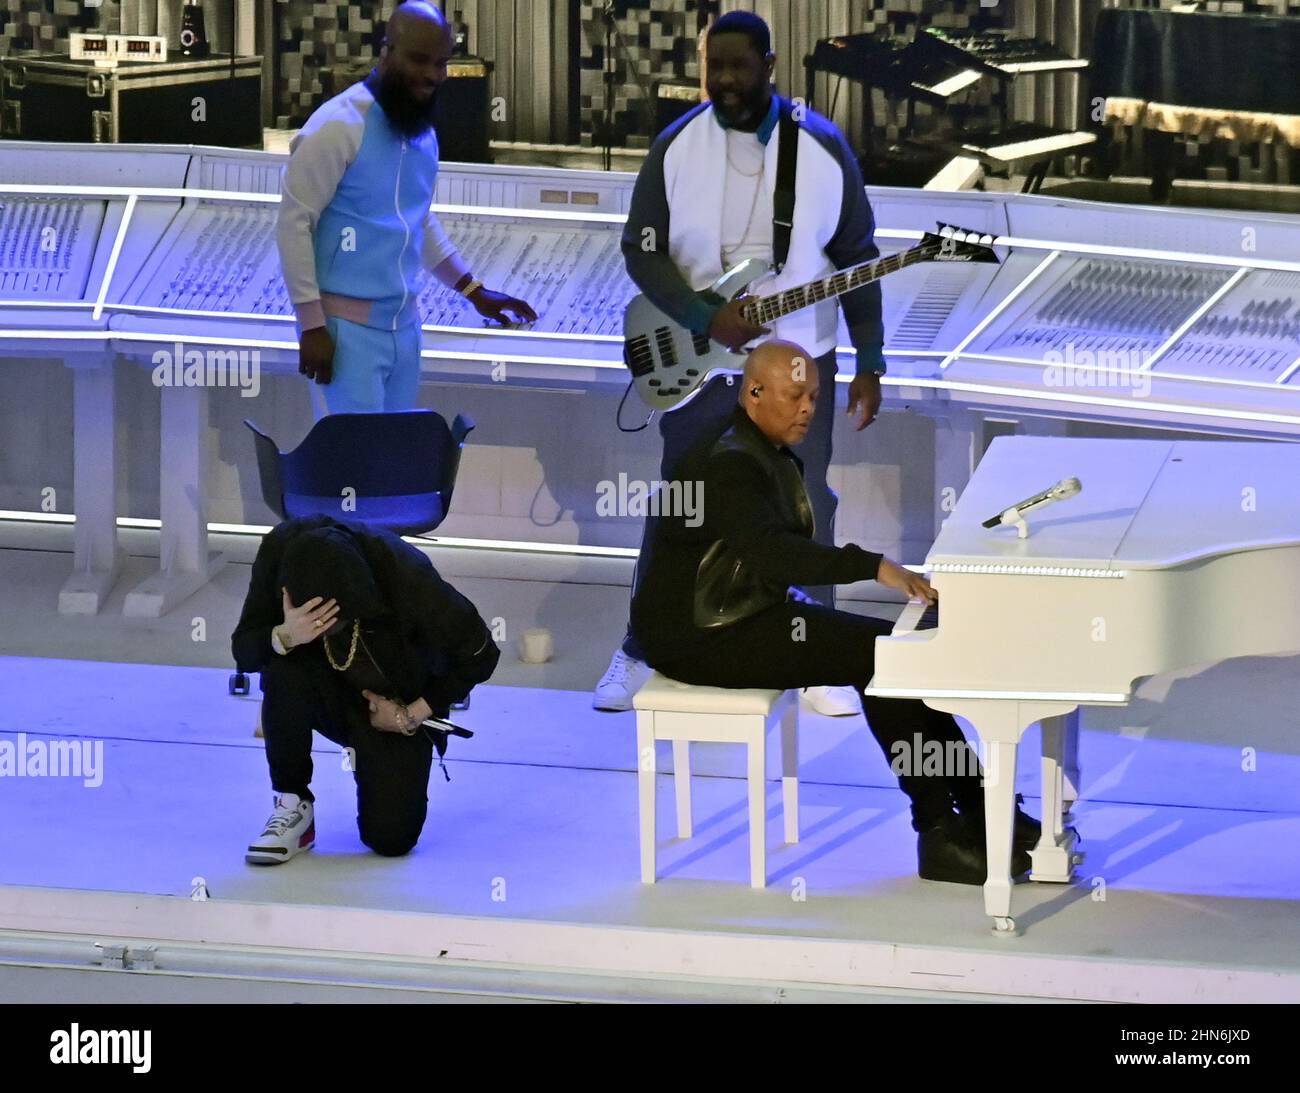 Inglewood, United States. 14th Feb, 2022. Rap superstar Eminem takes a knee during his Super Bowl LVI halftime performance in support of Black athletes and a tribute to Colin Kaepernick at SoFi Stadium in Inglewood, California on Sunday, February 13, 2022. According to a league spokesman, the NFL did not tell Eminem he couldn't knee during the halftime show. Photo by Jim Ruymen/UPI Credit: UPI/Alamy Live News Stock Photo